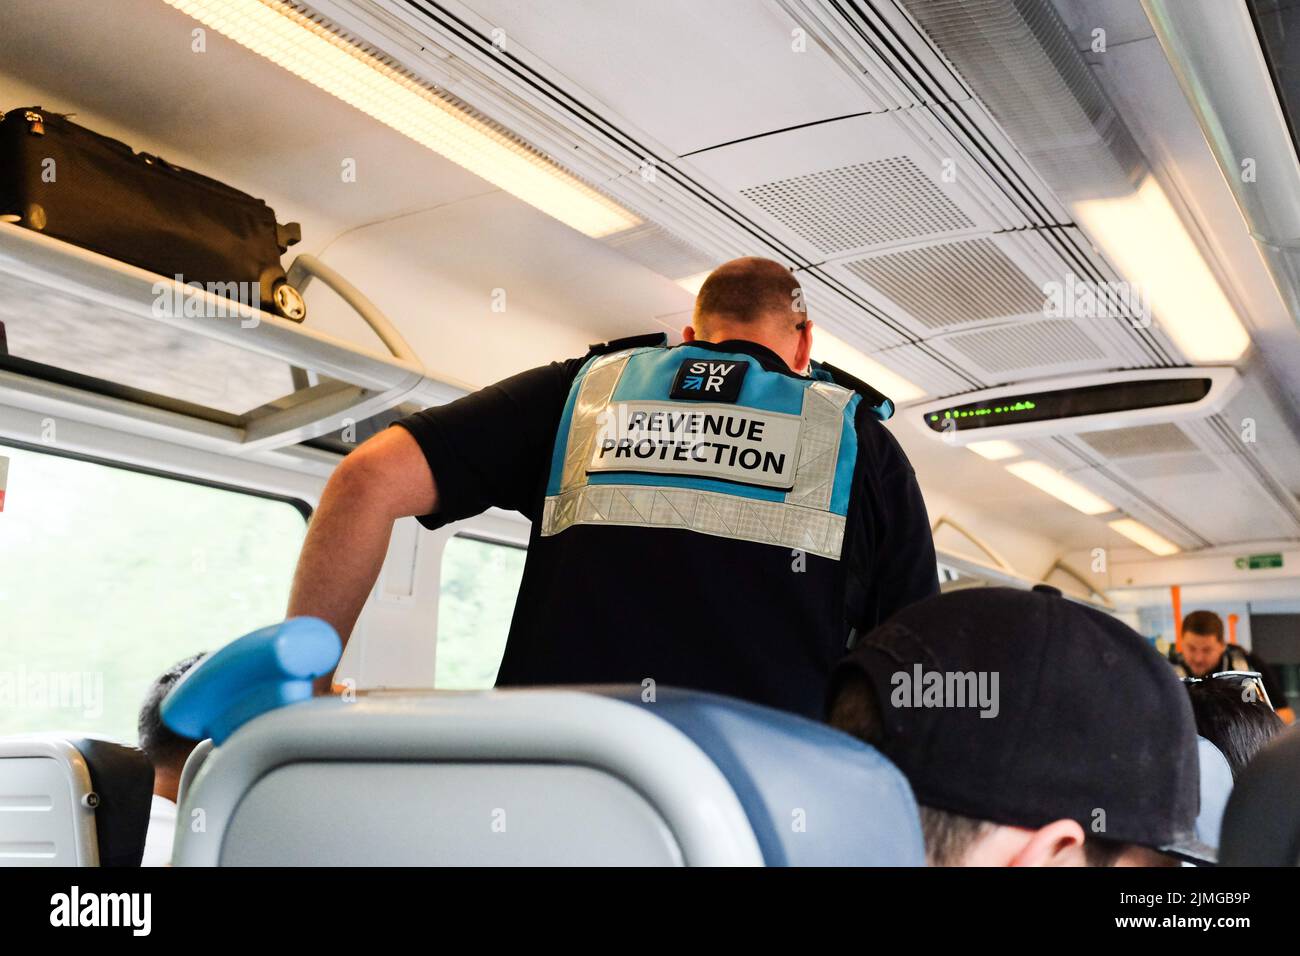 A South Western Railway ticket inspection officer passing through a train carriage. Stock Photo